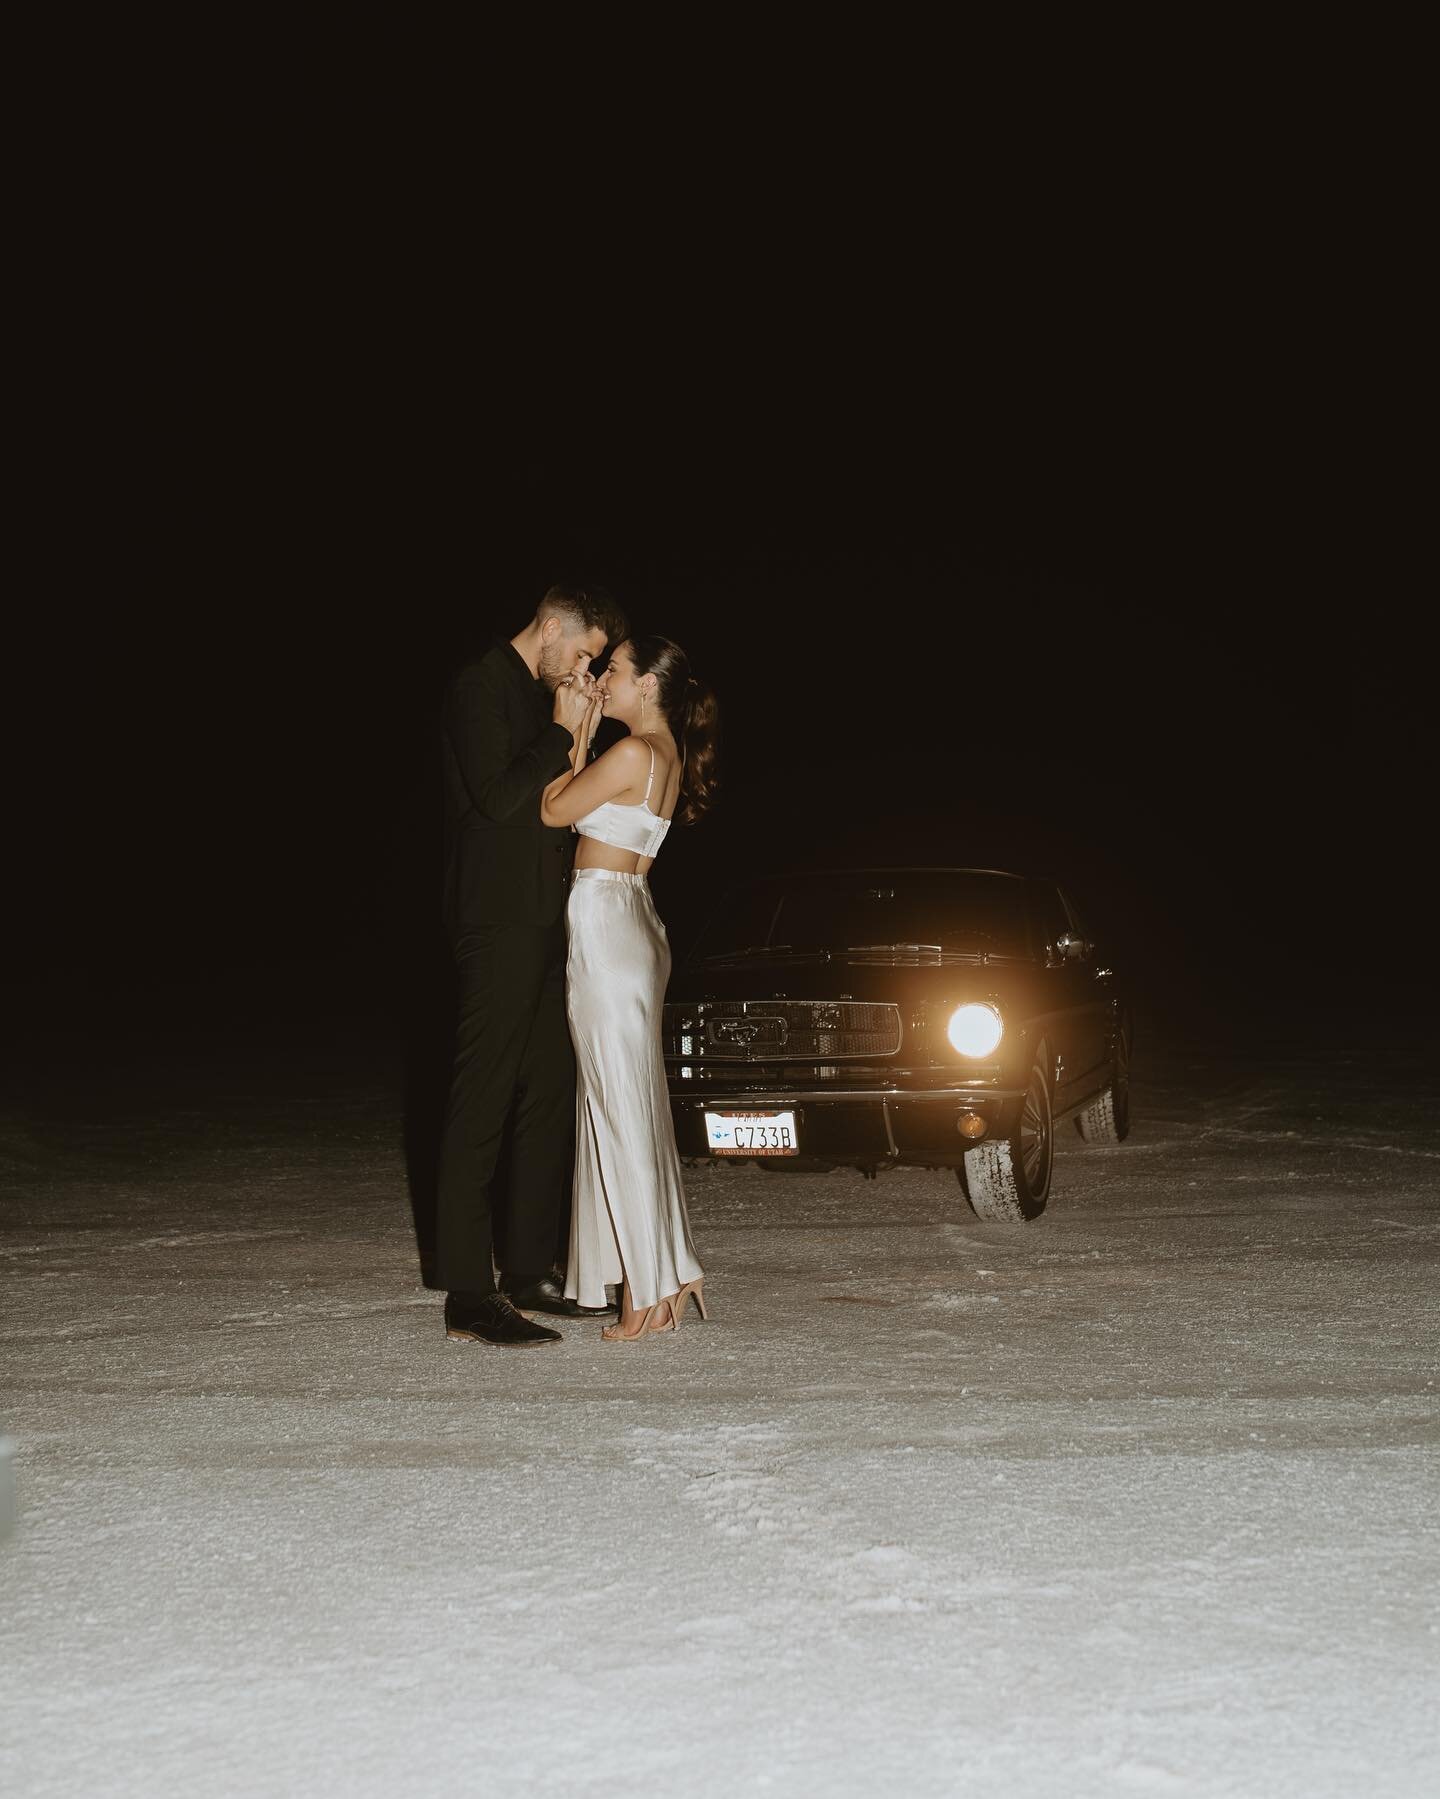 My dream car 🖤

Revving up my heart and their love, this 1965 Mustang was the perfect prop for this couples shoot. It made me feel like we were living in a classic love story.